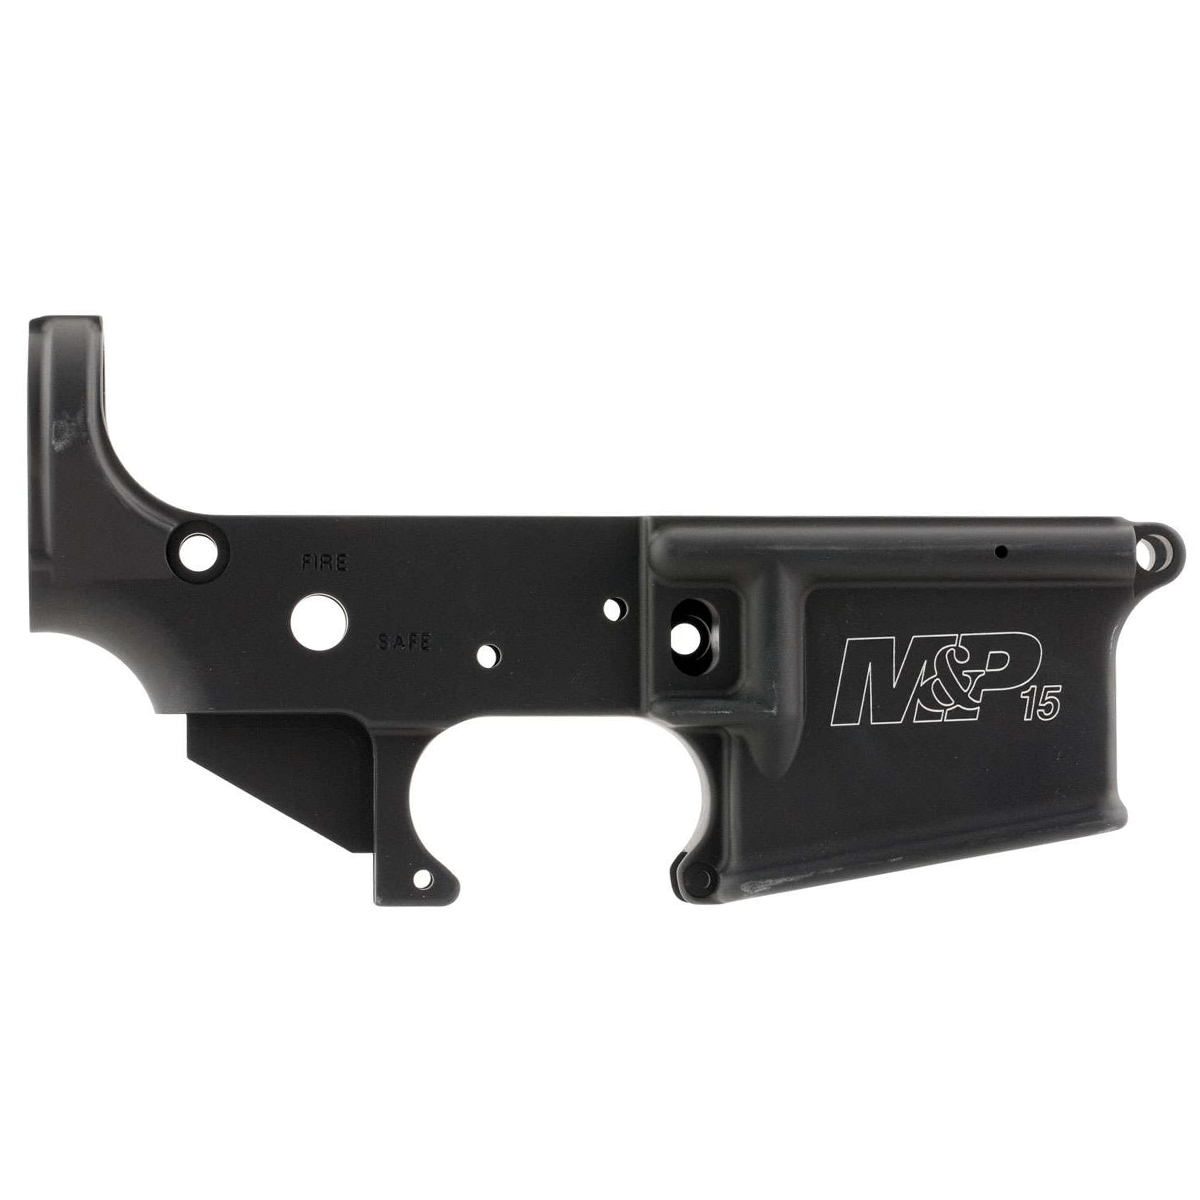 Smith & Wesson M&P 15 Stripped Lower Receiver